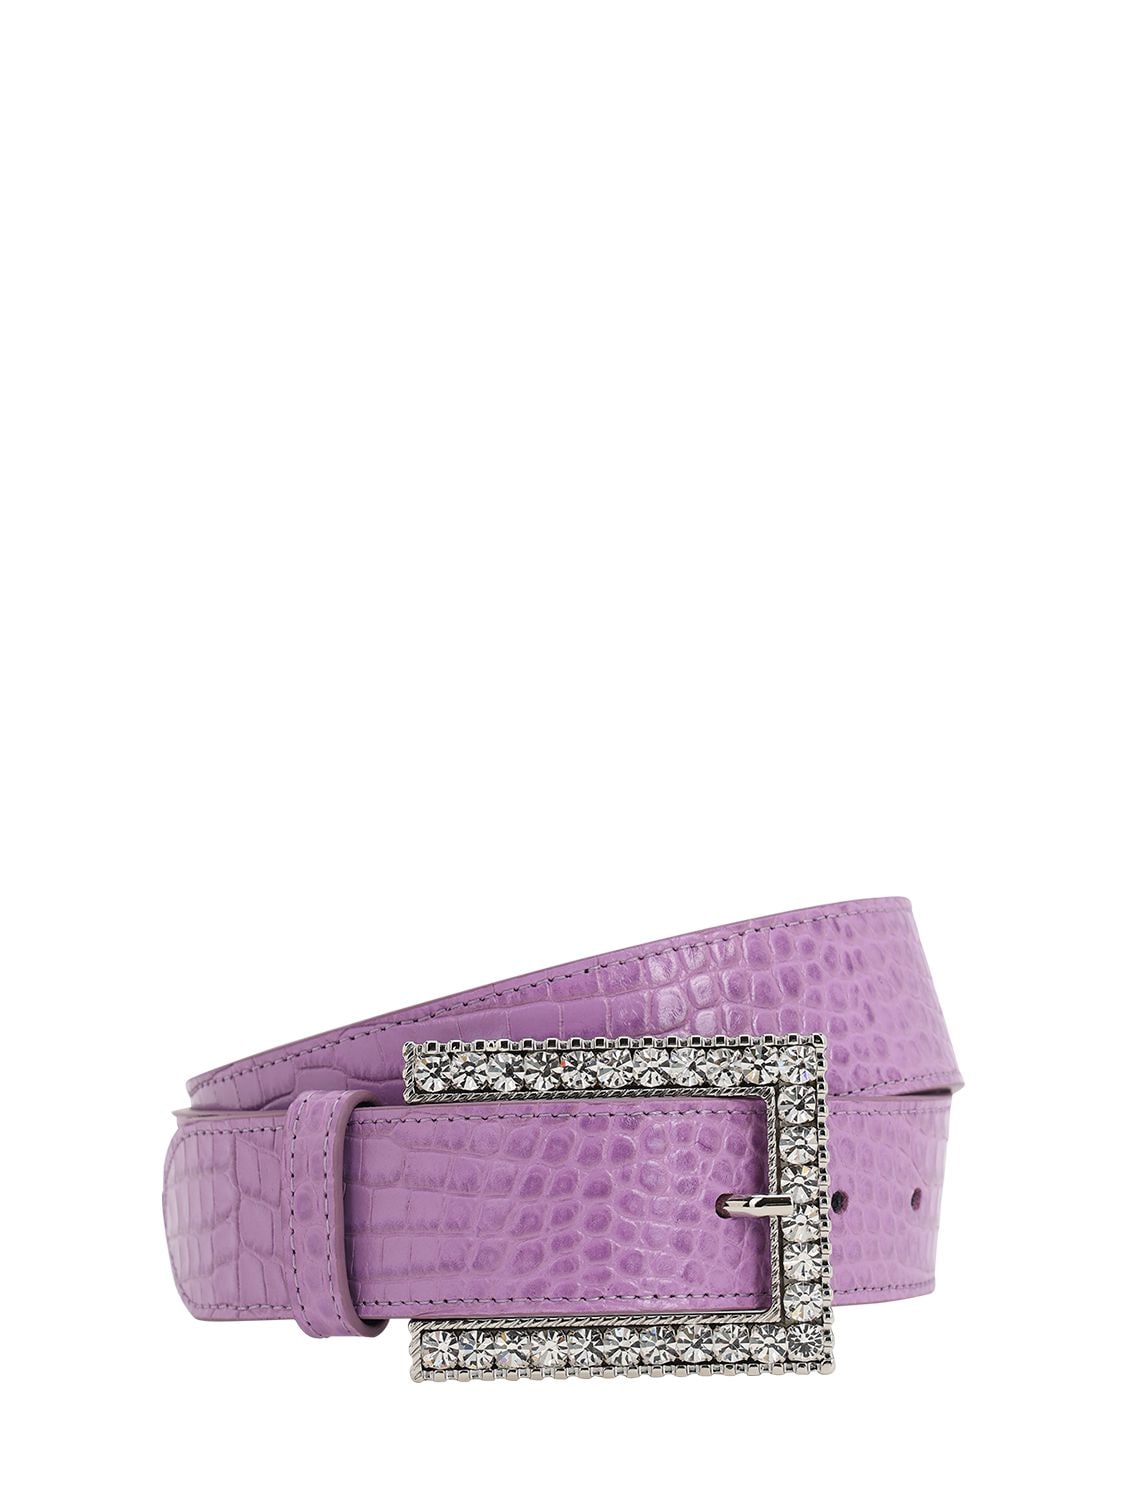 ALESSANDRA RICH 30MM CROC EMBOSSED LEATHER BELT,71I5CL003-NJCYNQ2